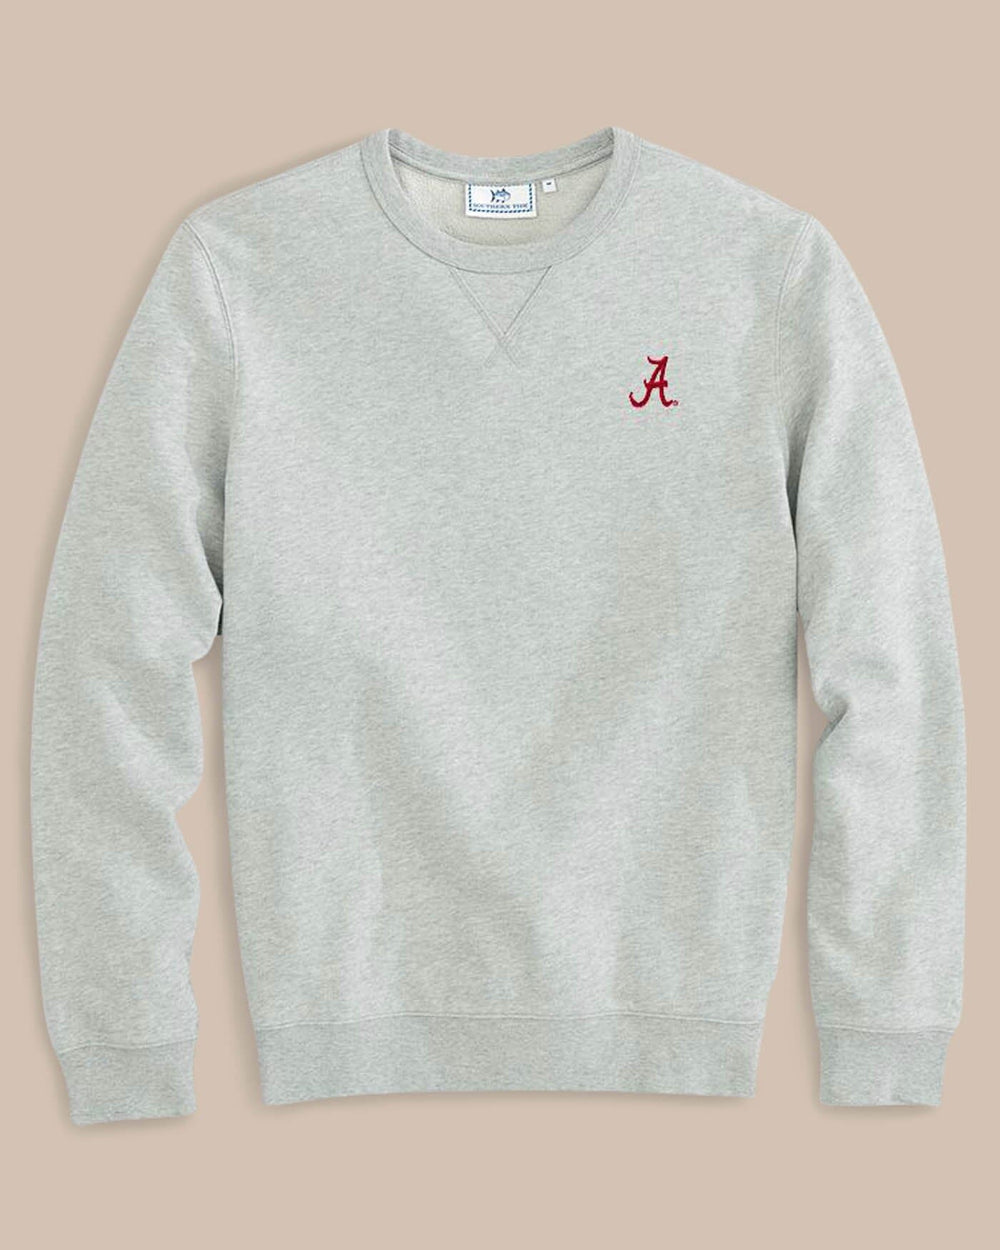 The front view of the Men's Grey Alabama Upper Deck Pullover Sweatshirt by Southern Tide - Heather Slate Grey